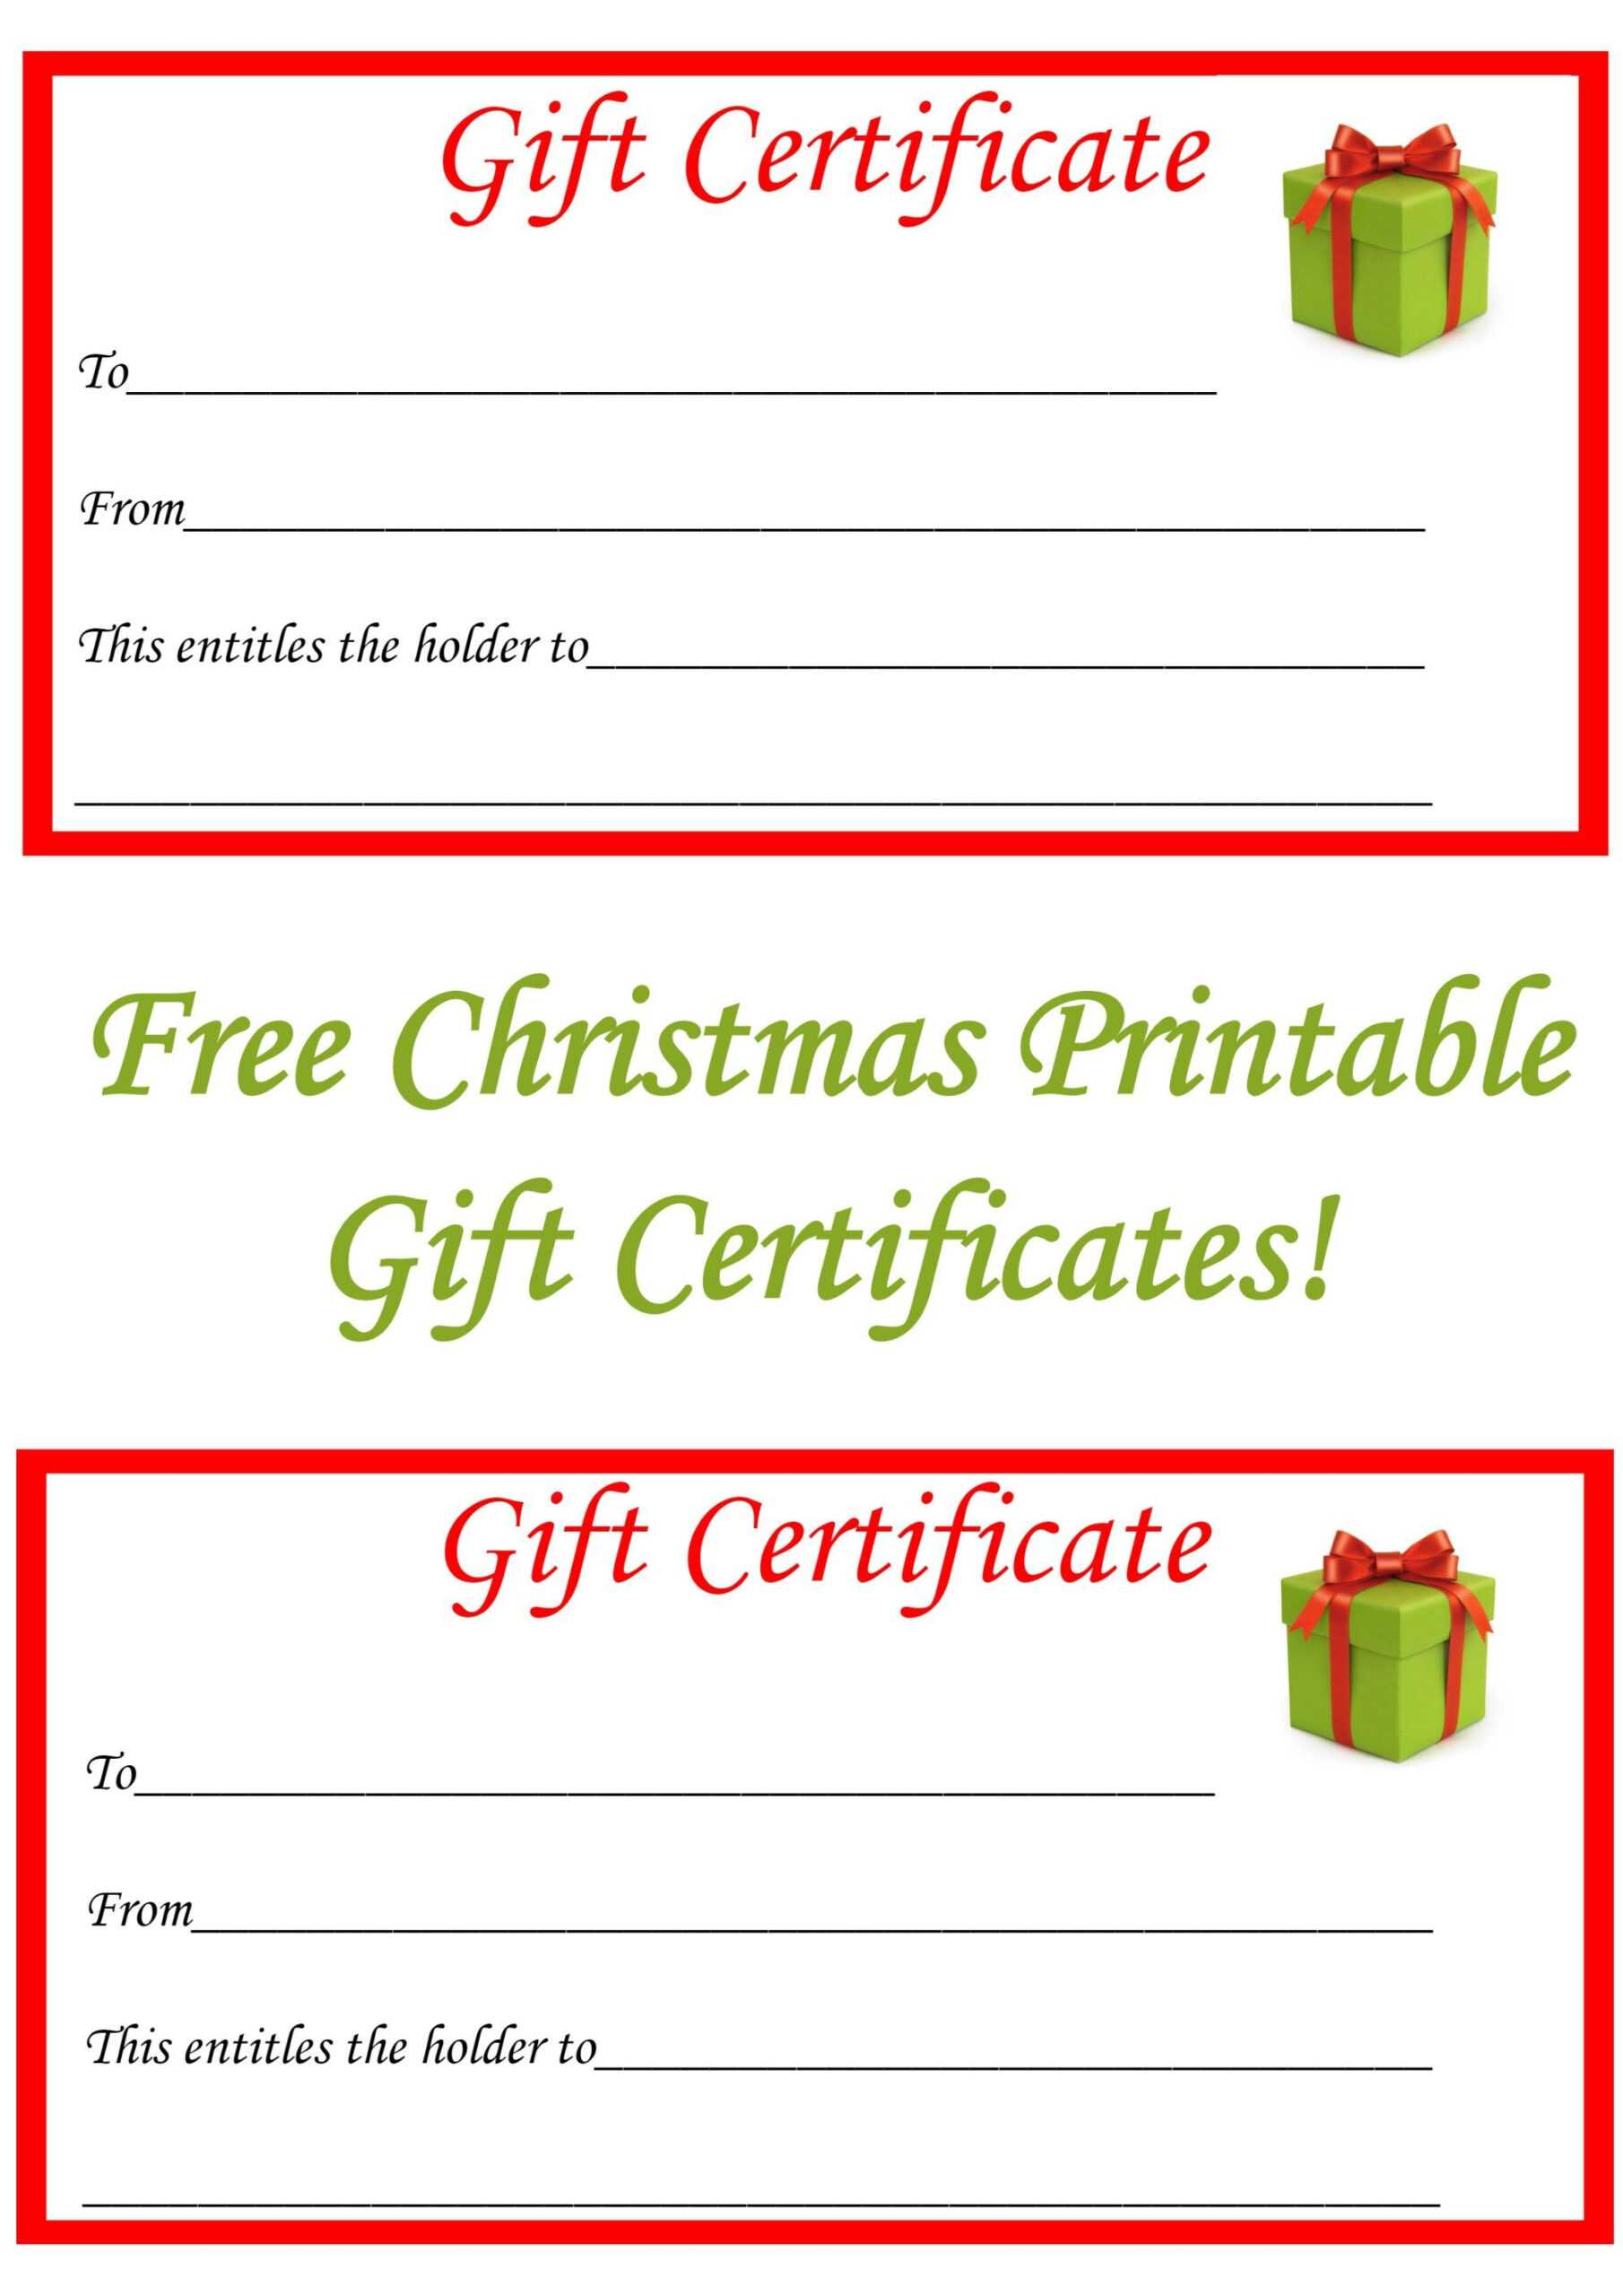 Printable Gift Voucher Template | Certificatetemplategift Inside Printable Gift Certificates Templates Free